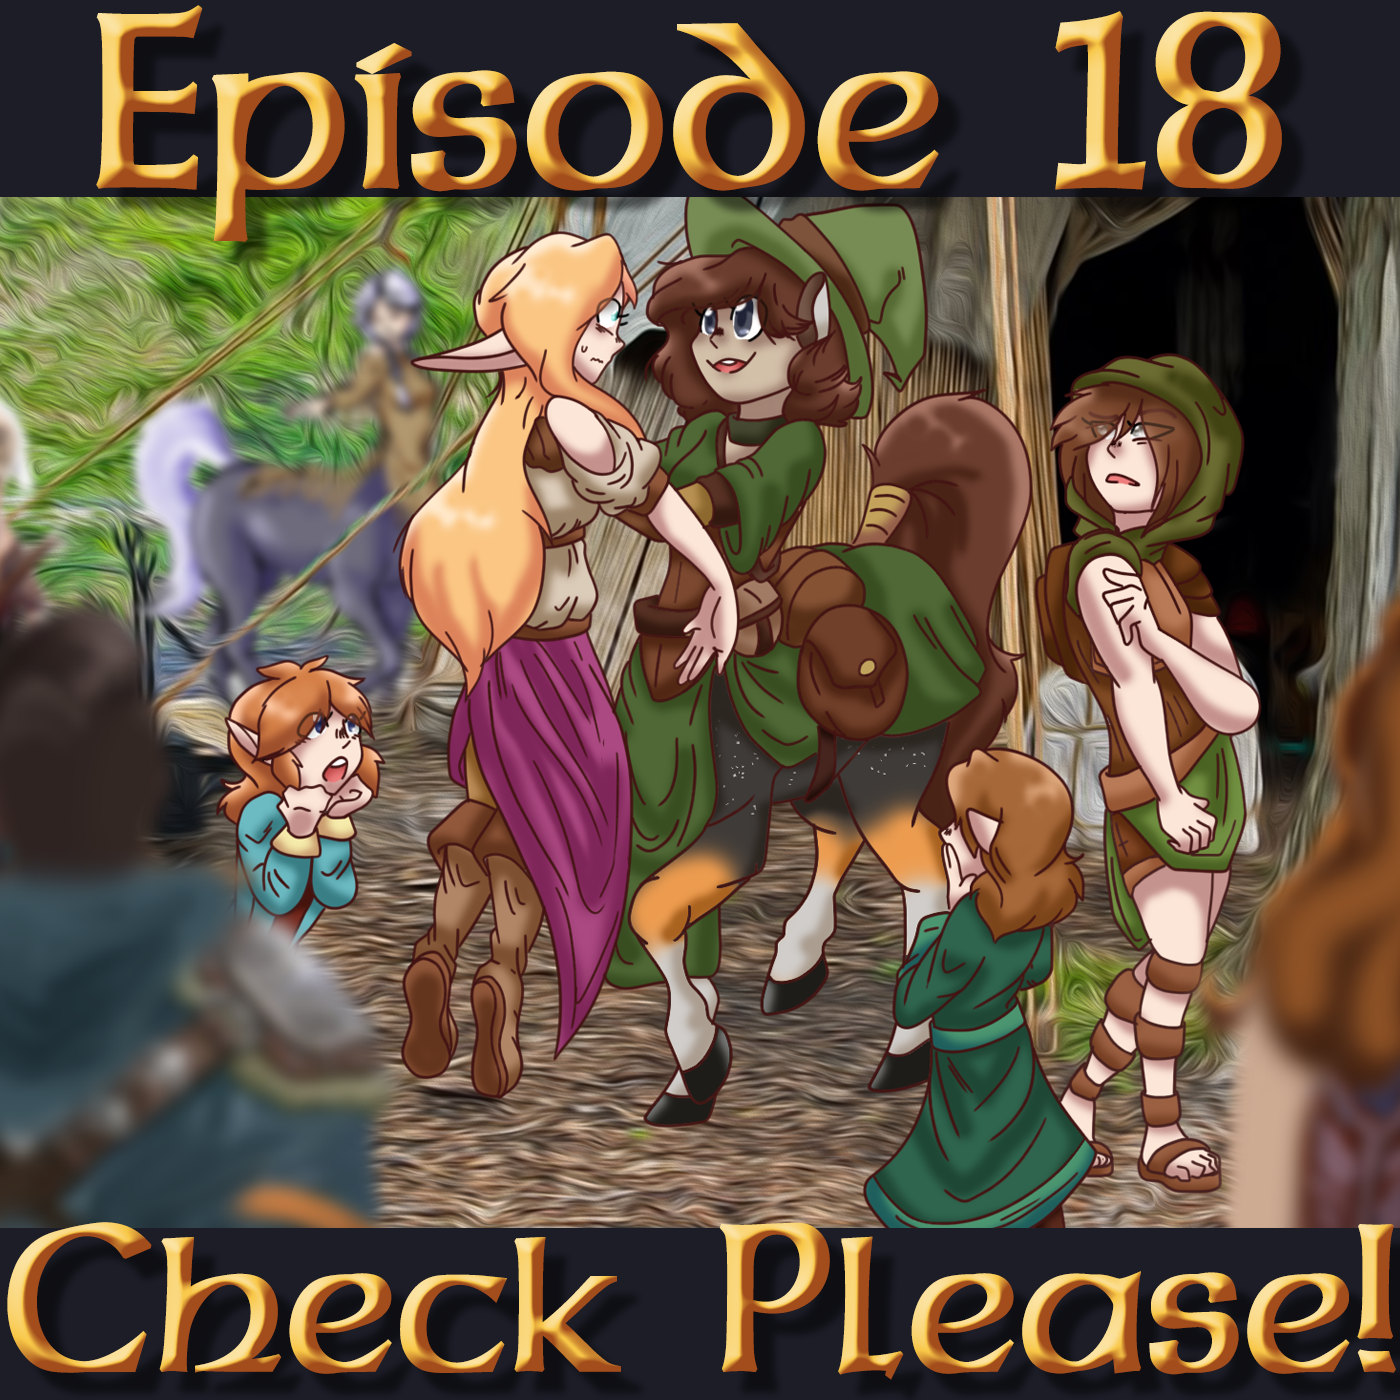 Check Please! S1 E18: Too Hot To Trot